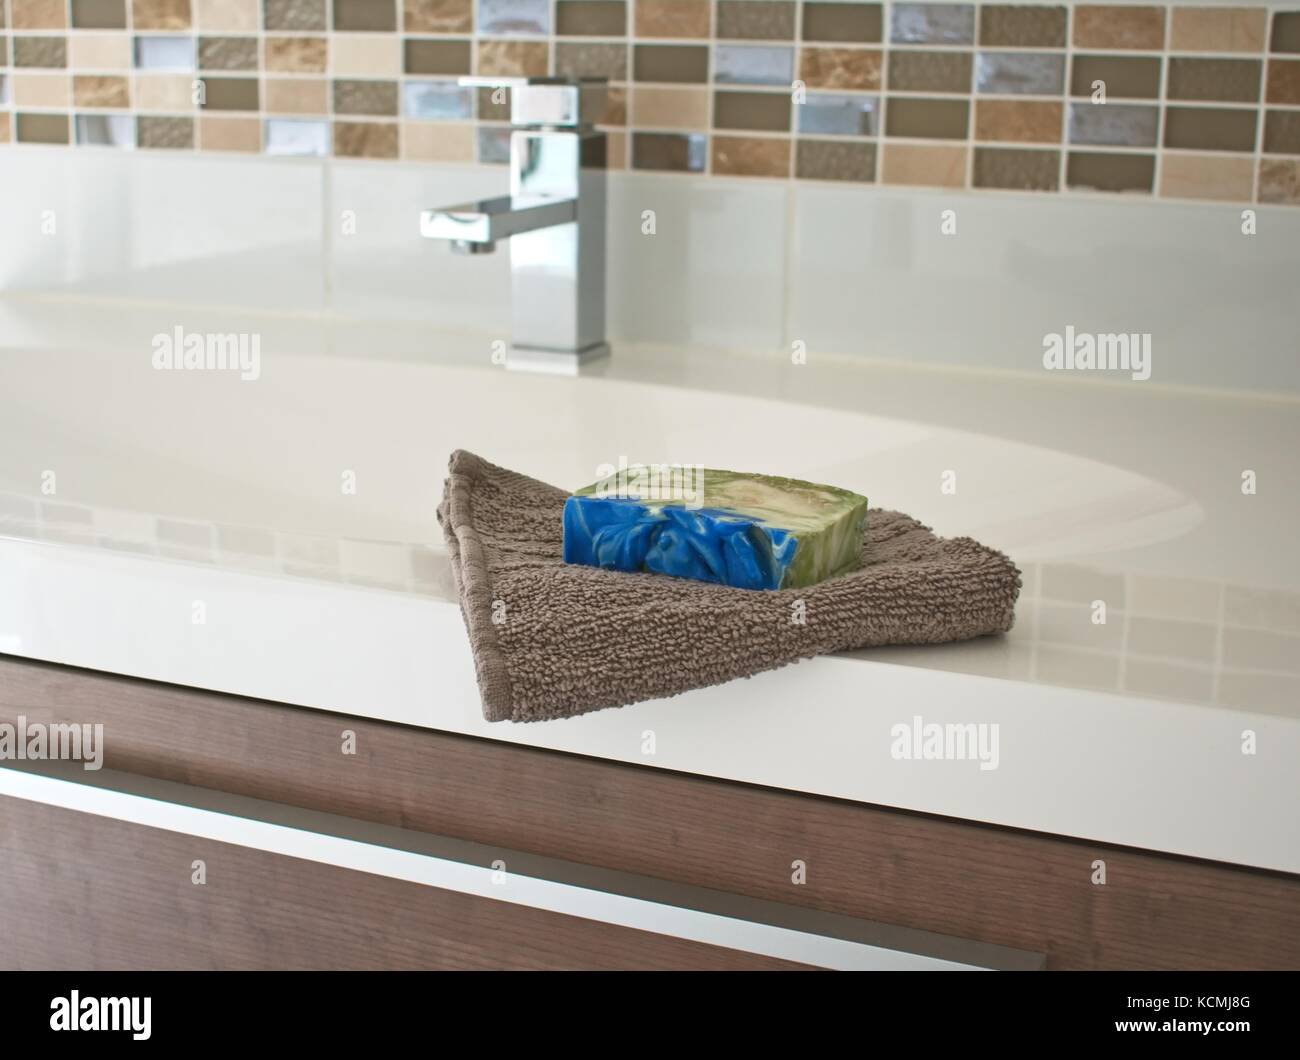 Hand towel and soap on basin with mixer tap in the background Stock Photo